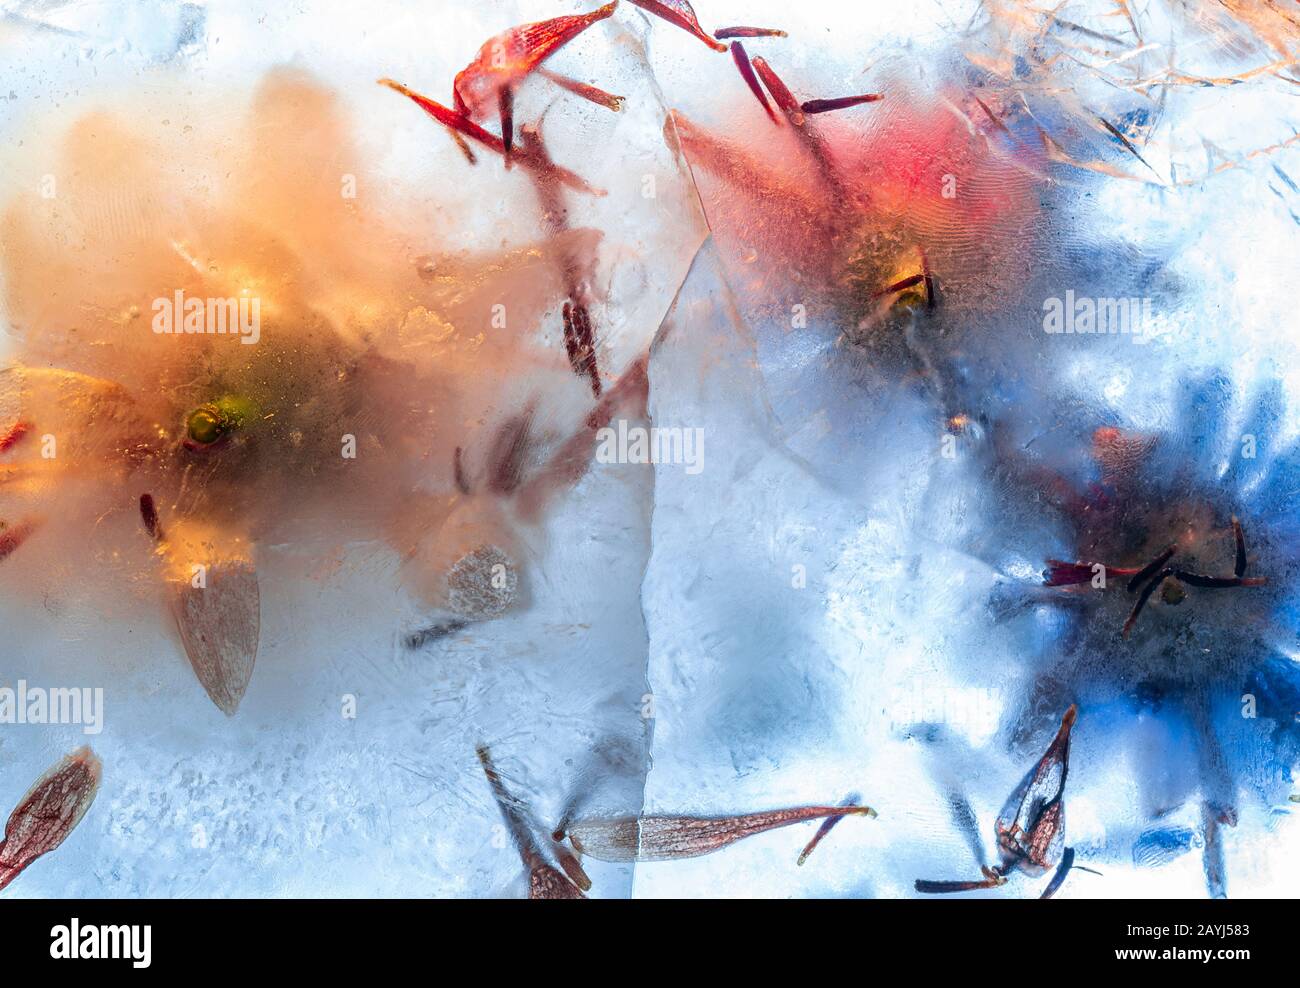 Frozen flowers in thick ice block with cracked surface - creative abstract background Stock Photo